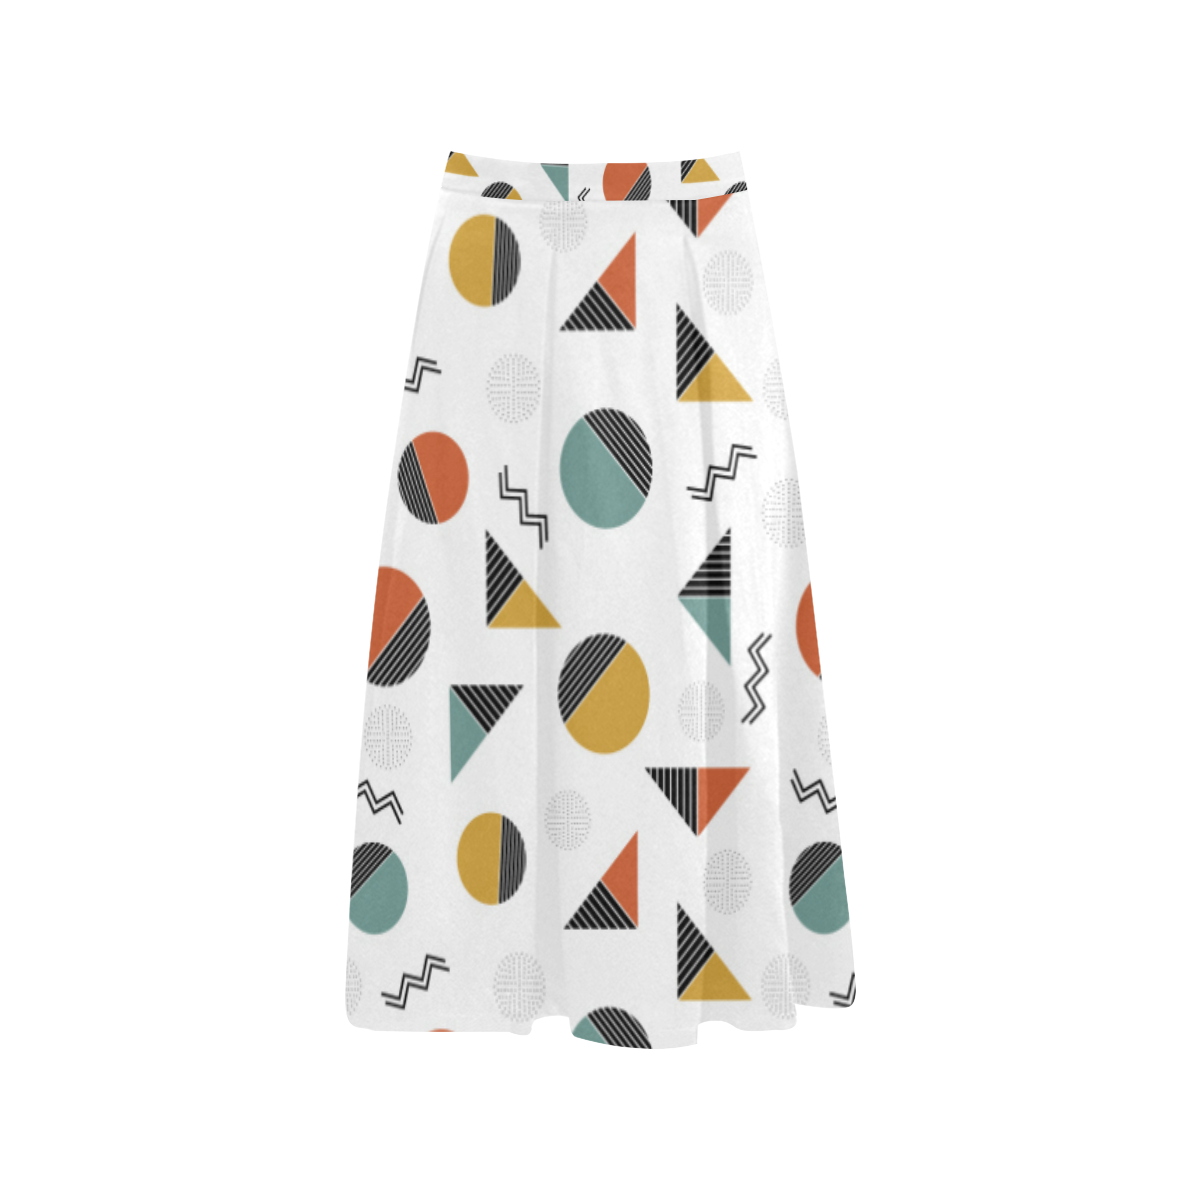 Geo Cutting Shapes Aoede Crepe Skirt (Model D16)